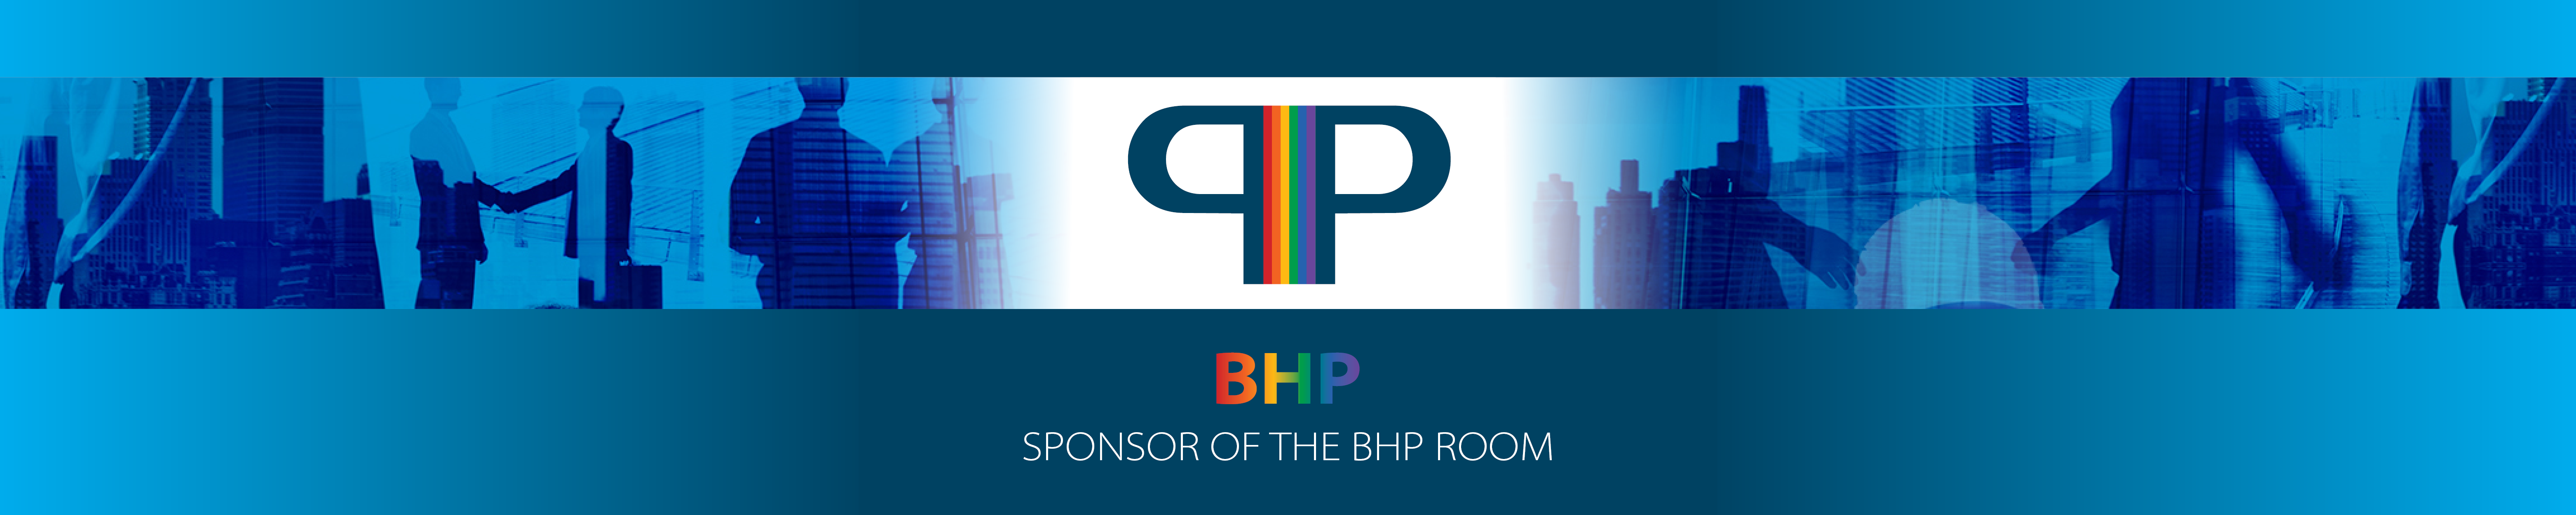 PIP_Conference_BHP_RoomSponsor1